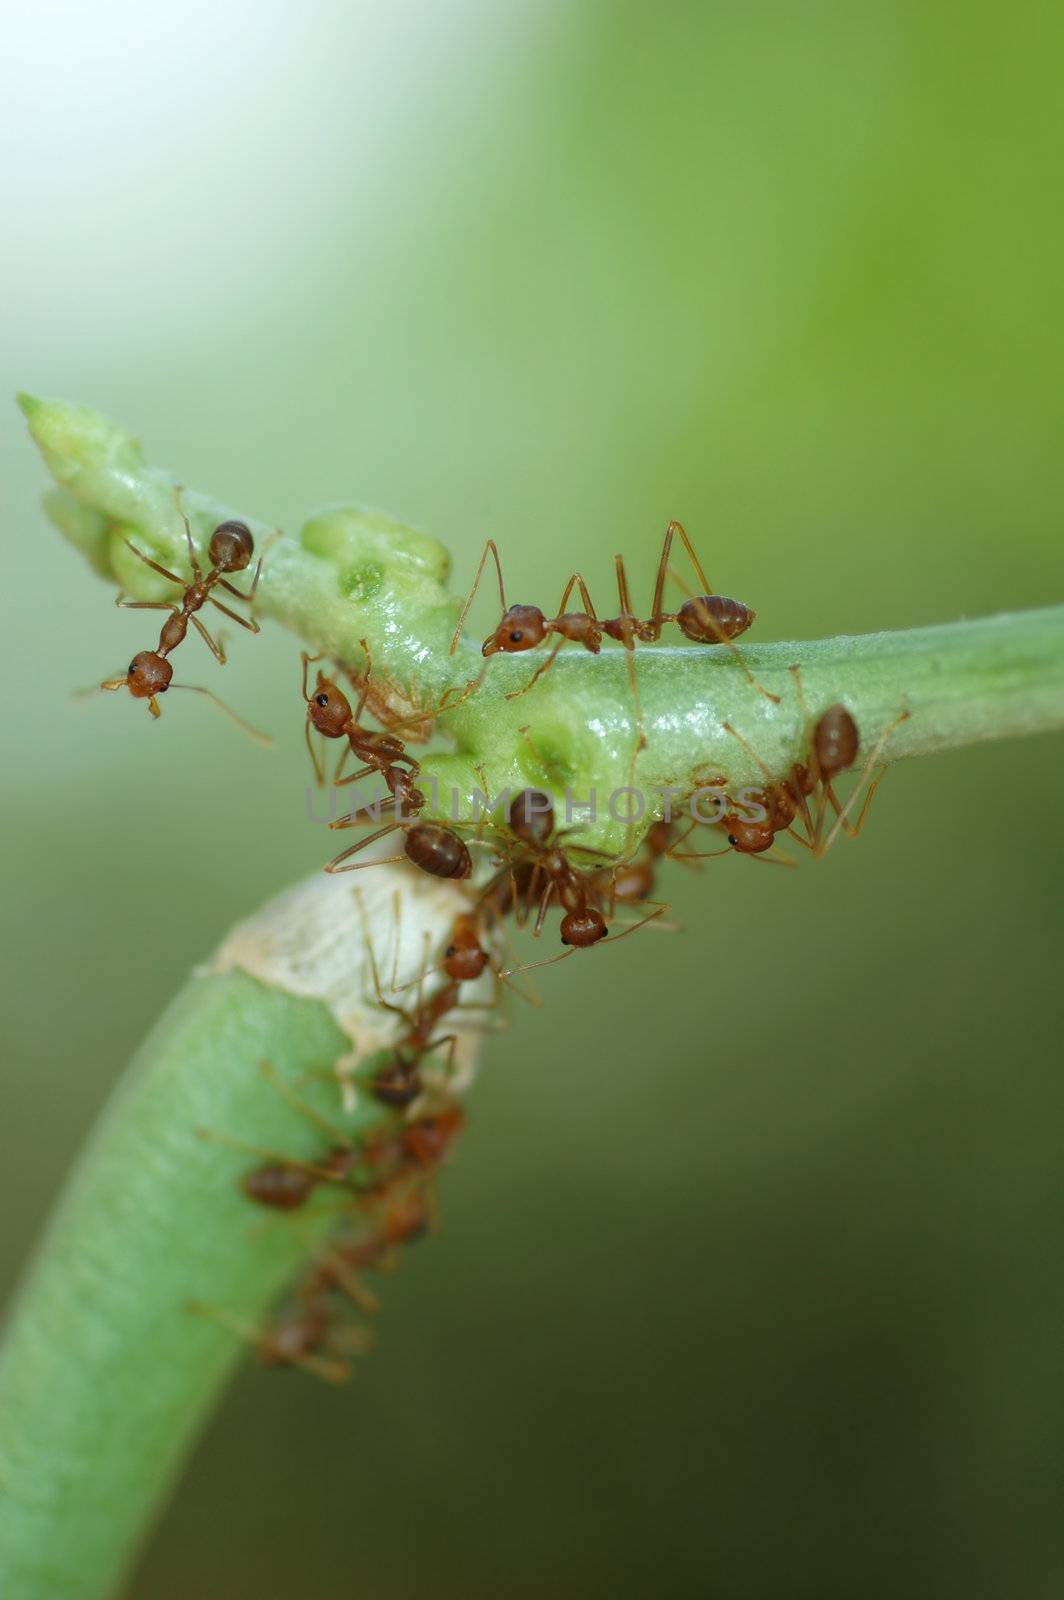 Group of Ants by khwi